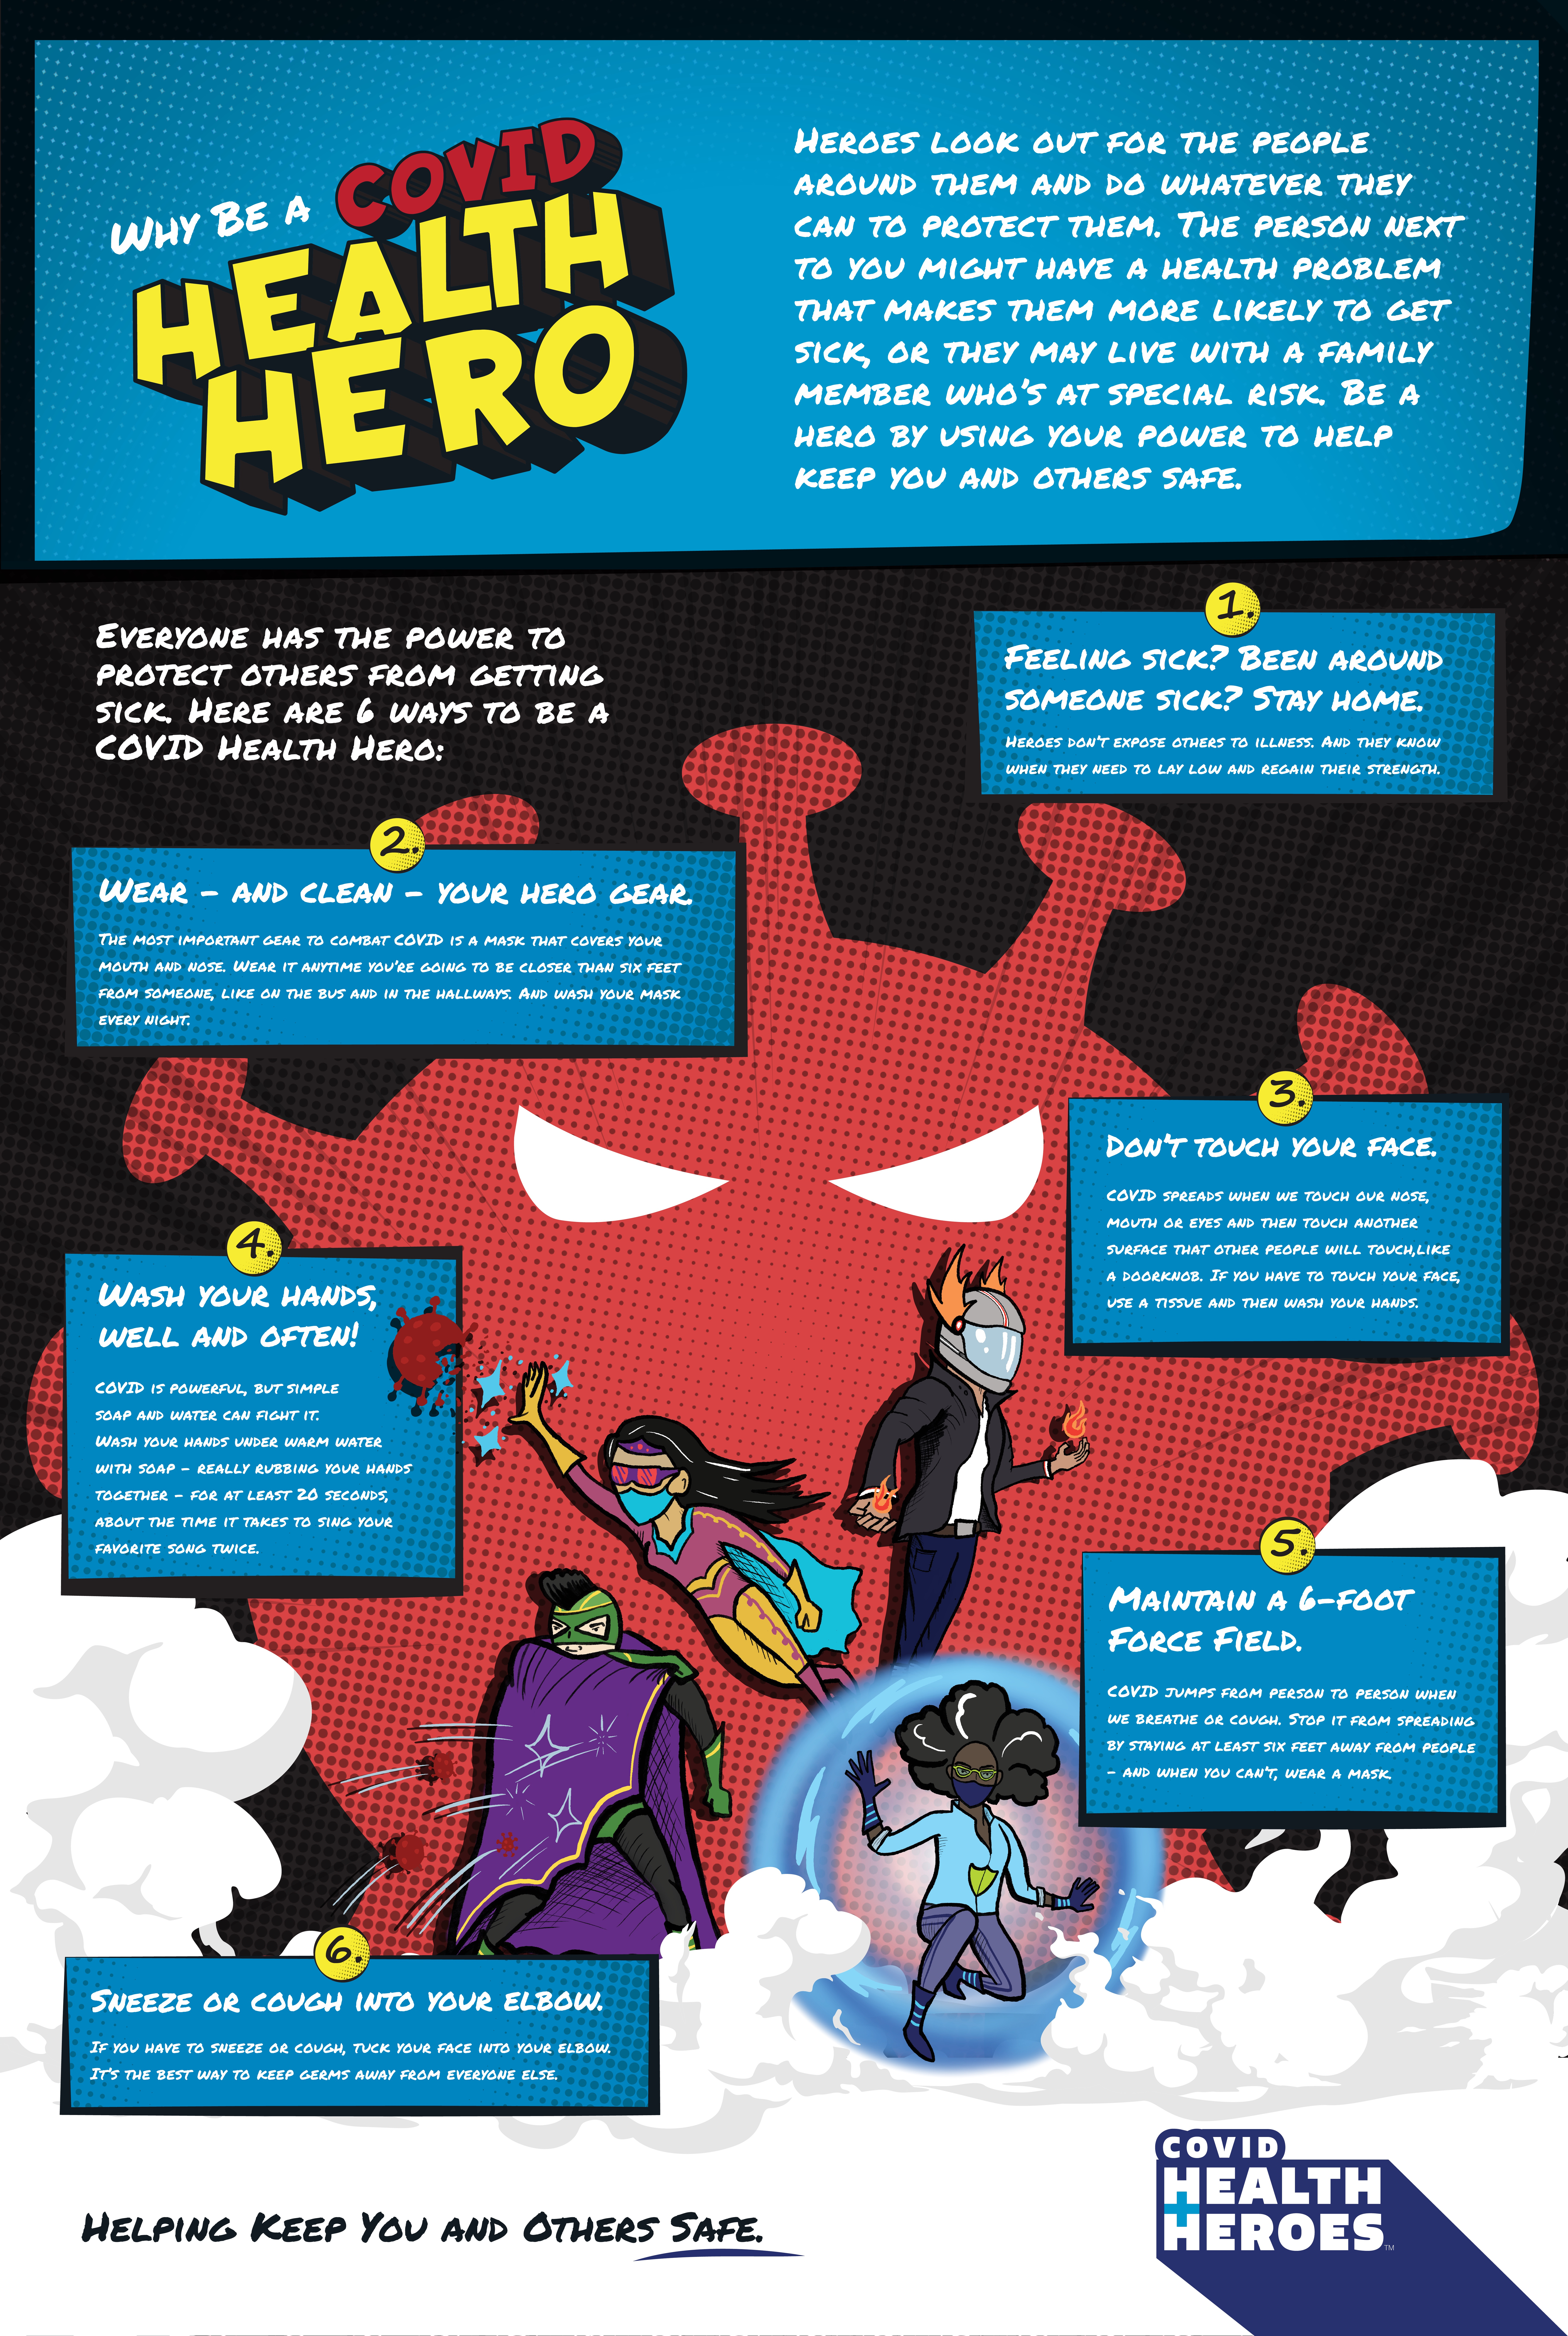 Sachs Media Group donates creative campaign to help students be “COVID Health Heroes”